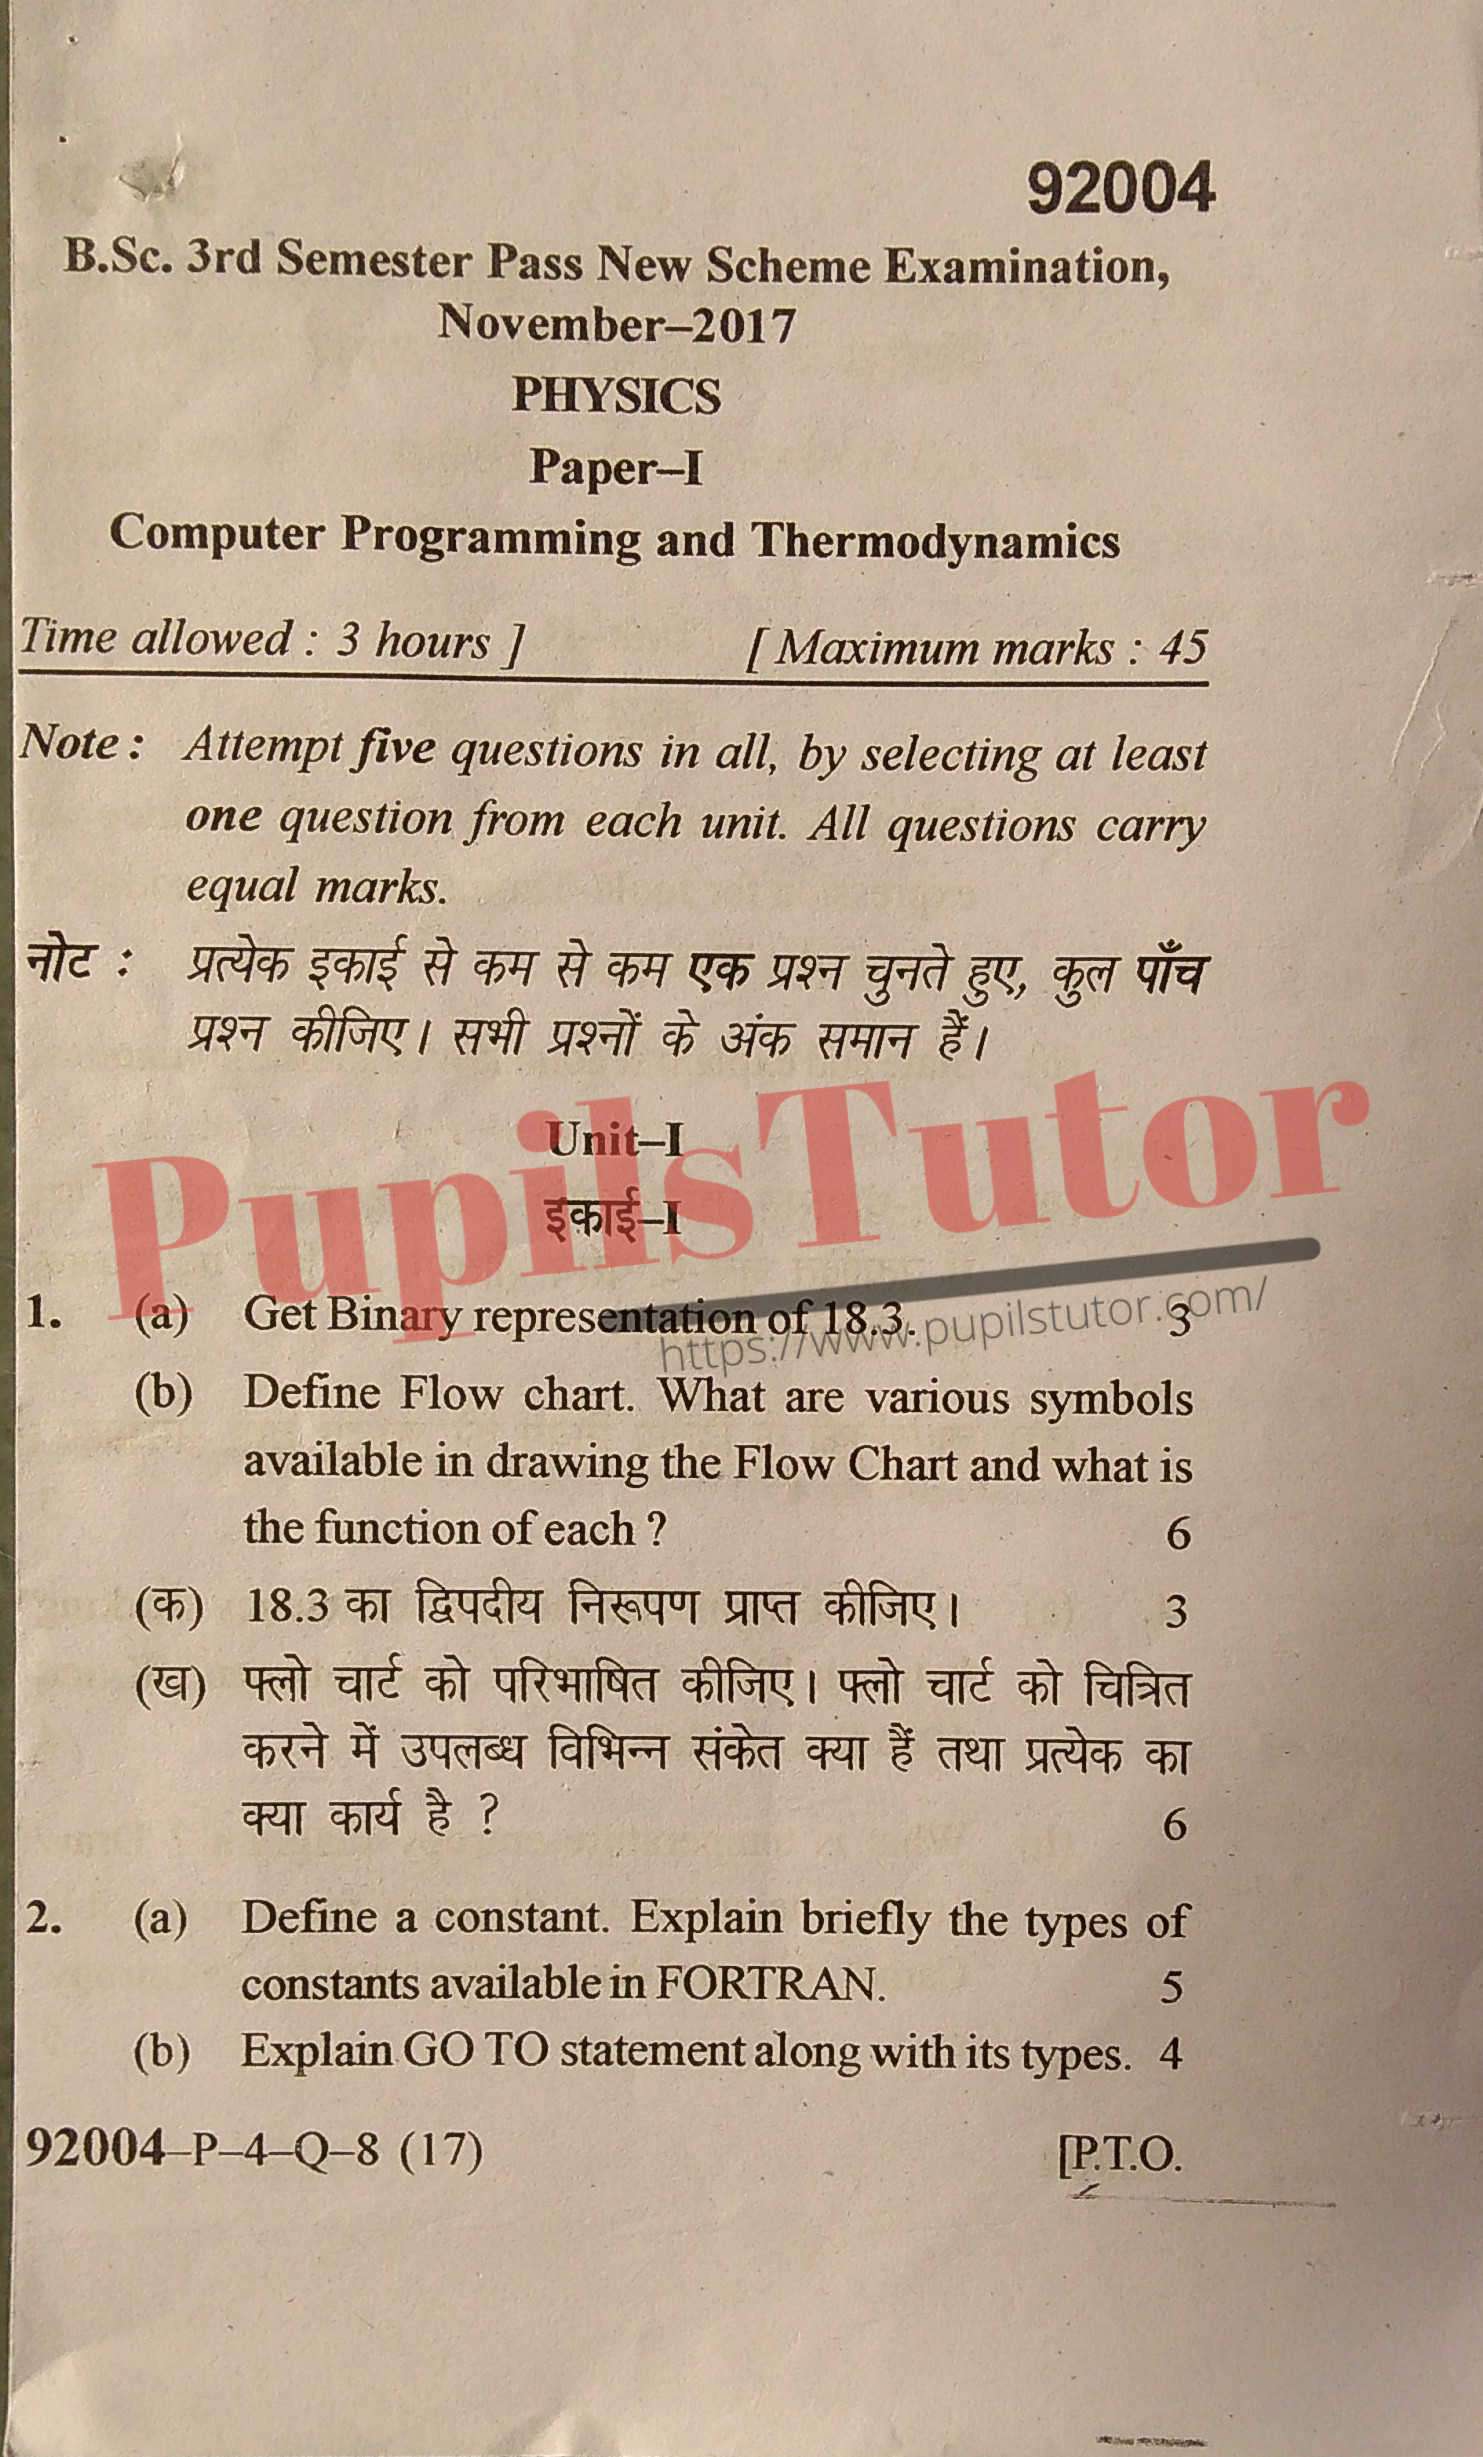 MDU (Maharshi Dayanand University, Rohtak Haryana) BSc Physics Pass Course Third Semester Previous Year Computer Programming And Thermodynamics Question Paper For November, 2017 Exam (Question Paper Page 1) - pupilstutor.com